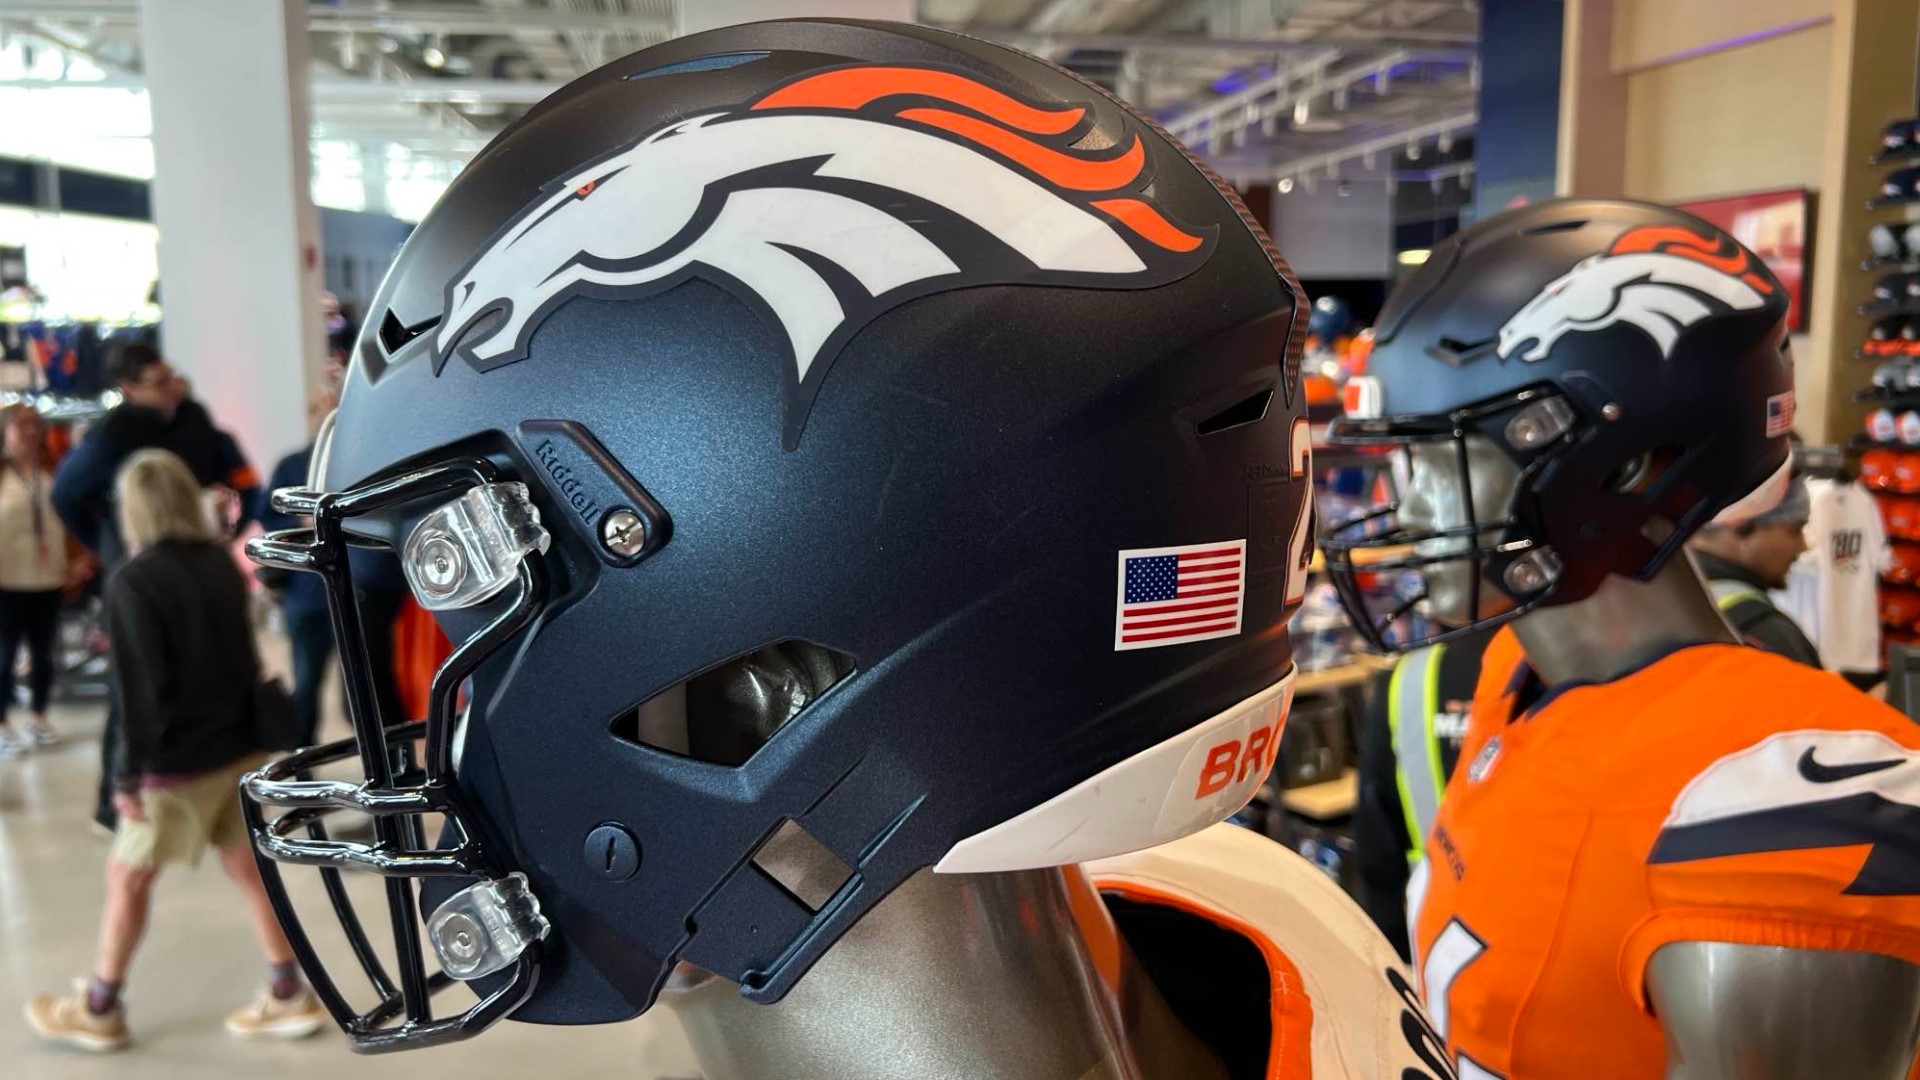 The first uniform change for the Broncos in 27 years, the new uniforms aim to pay tribute to the team’s tradition with a modern look.